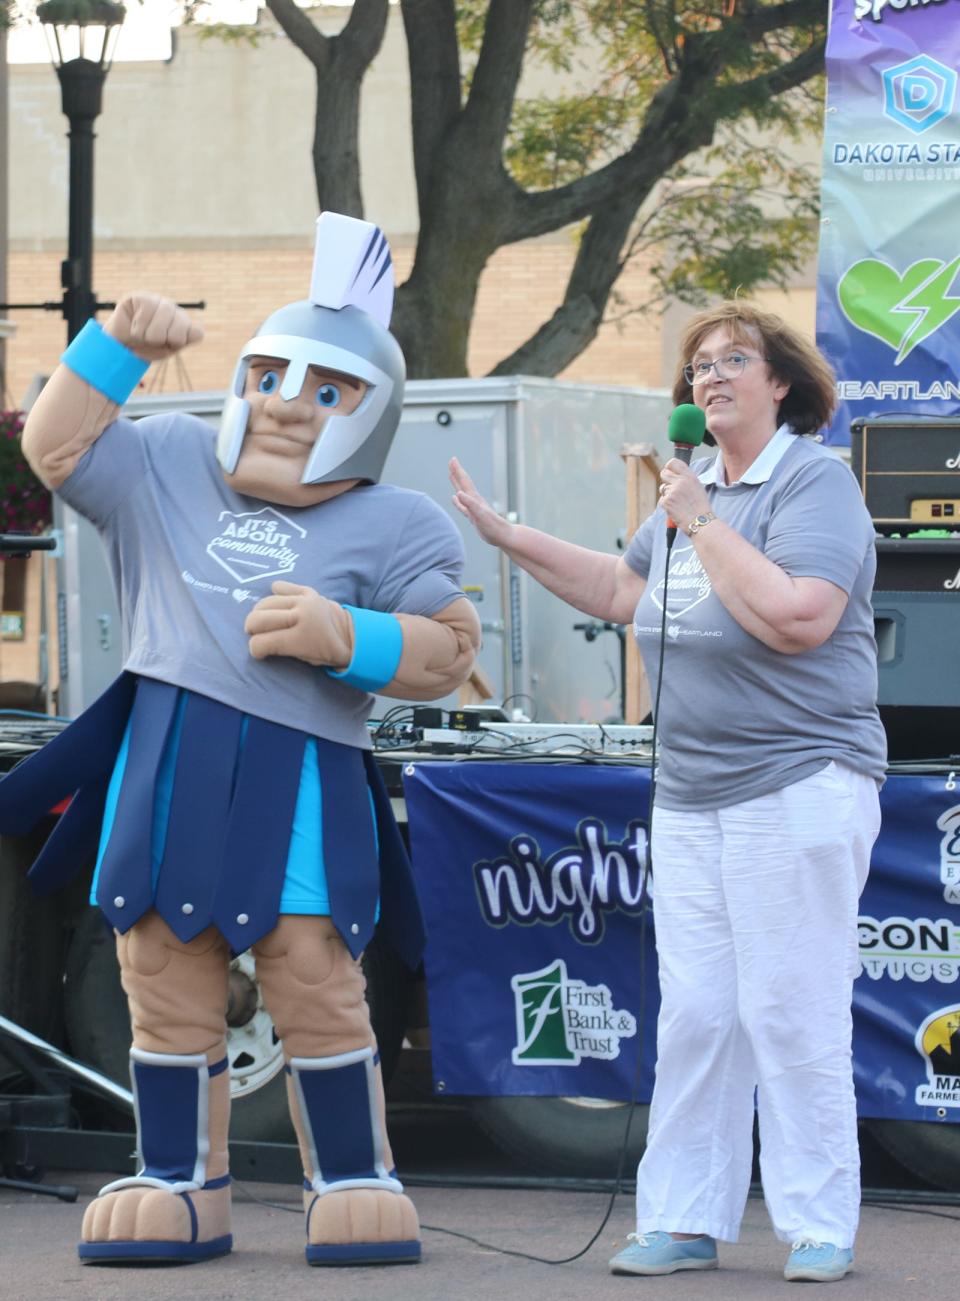 President José-Marie Griffiths (right) introduces General Cyber, Dakota State University's new mascot, to the Madison community Aug. 17.